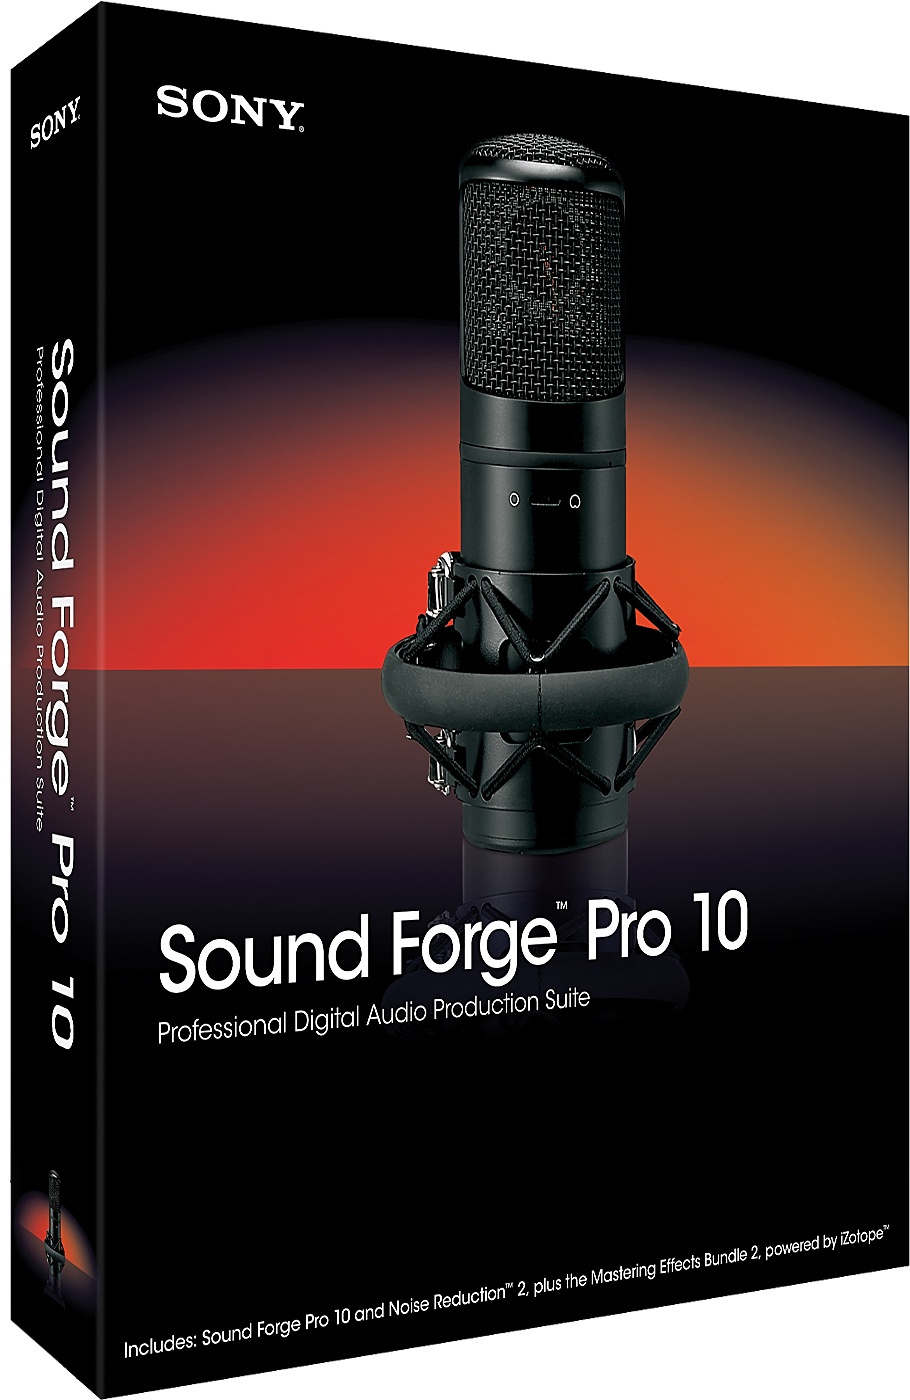 Sound Forge Pro + Noise Reduction + Dolby Digital.